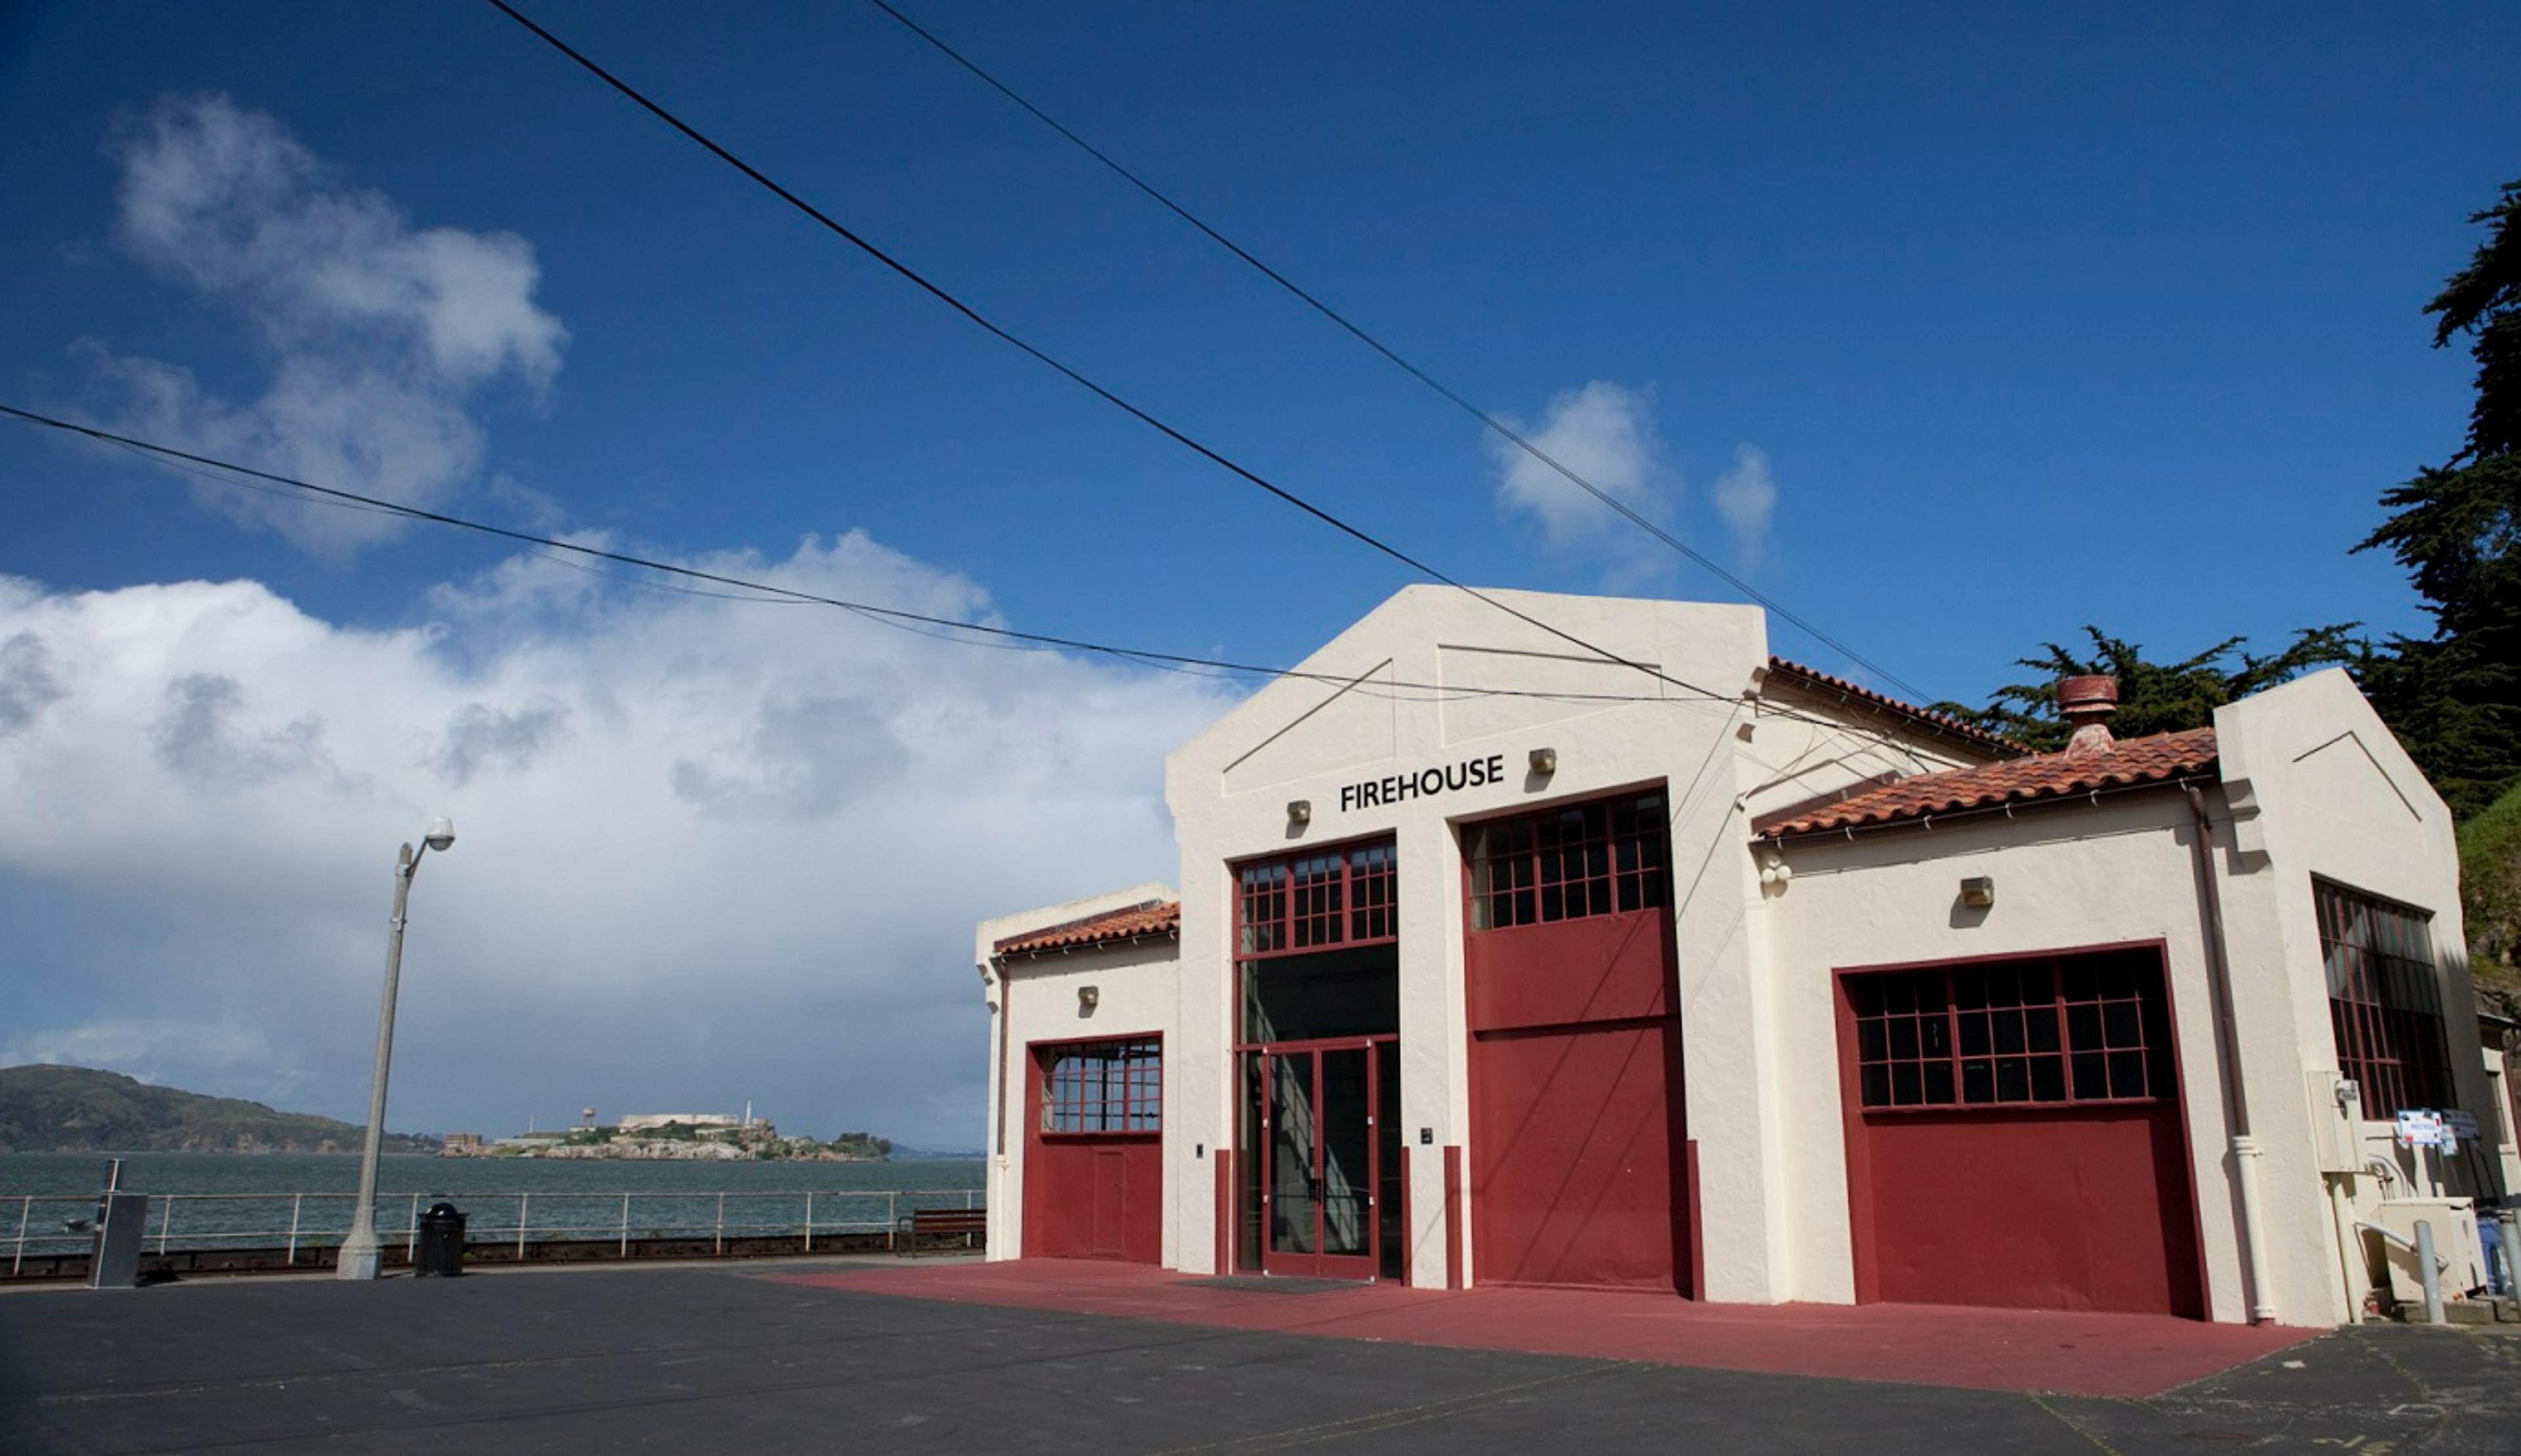 The Firehouse at Fort Mason Center for Arts & Culture